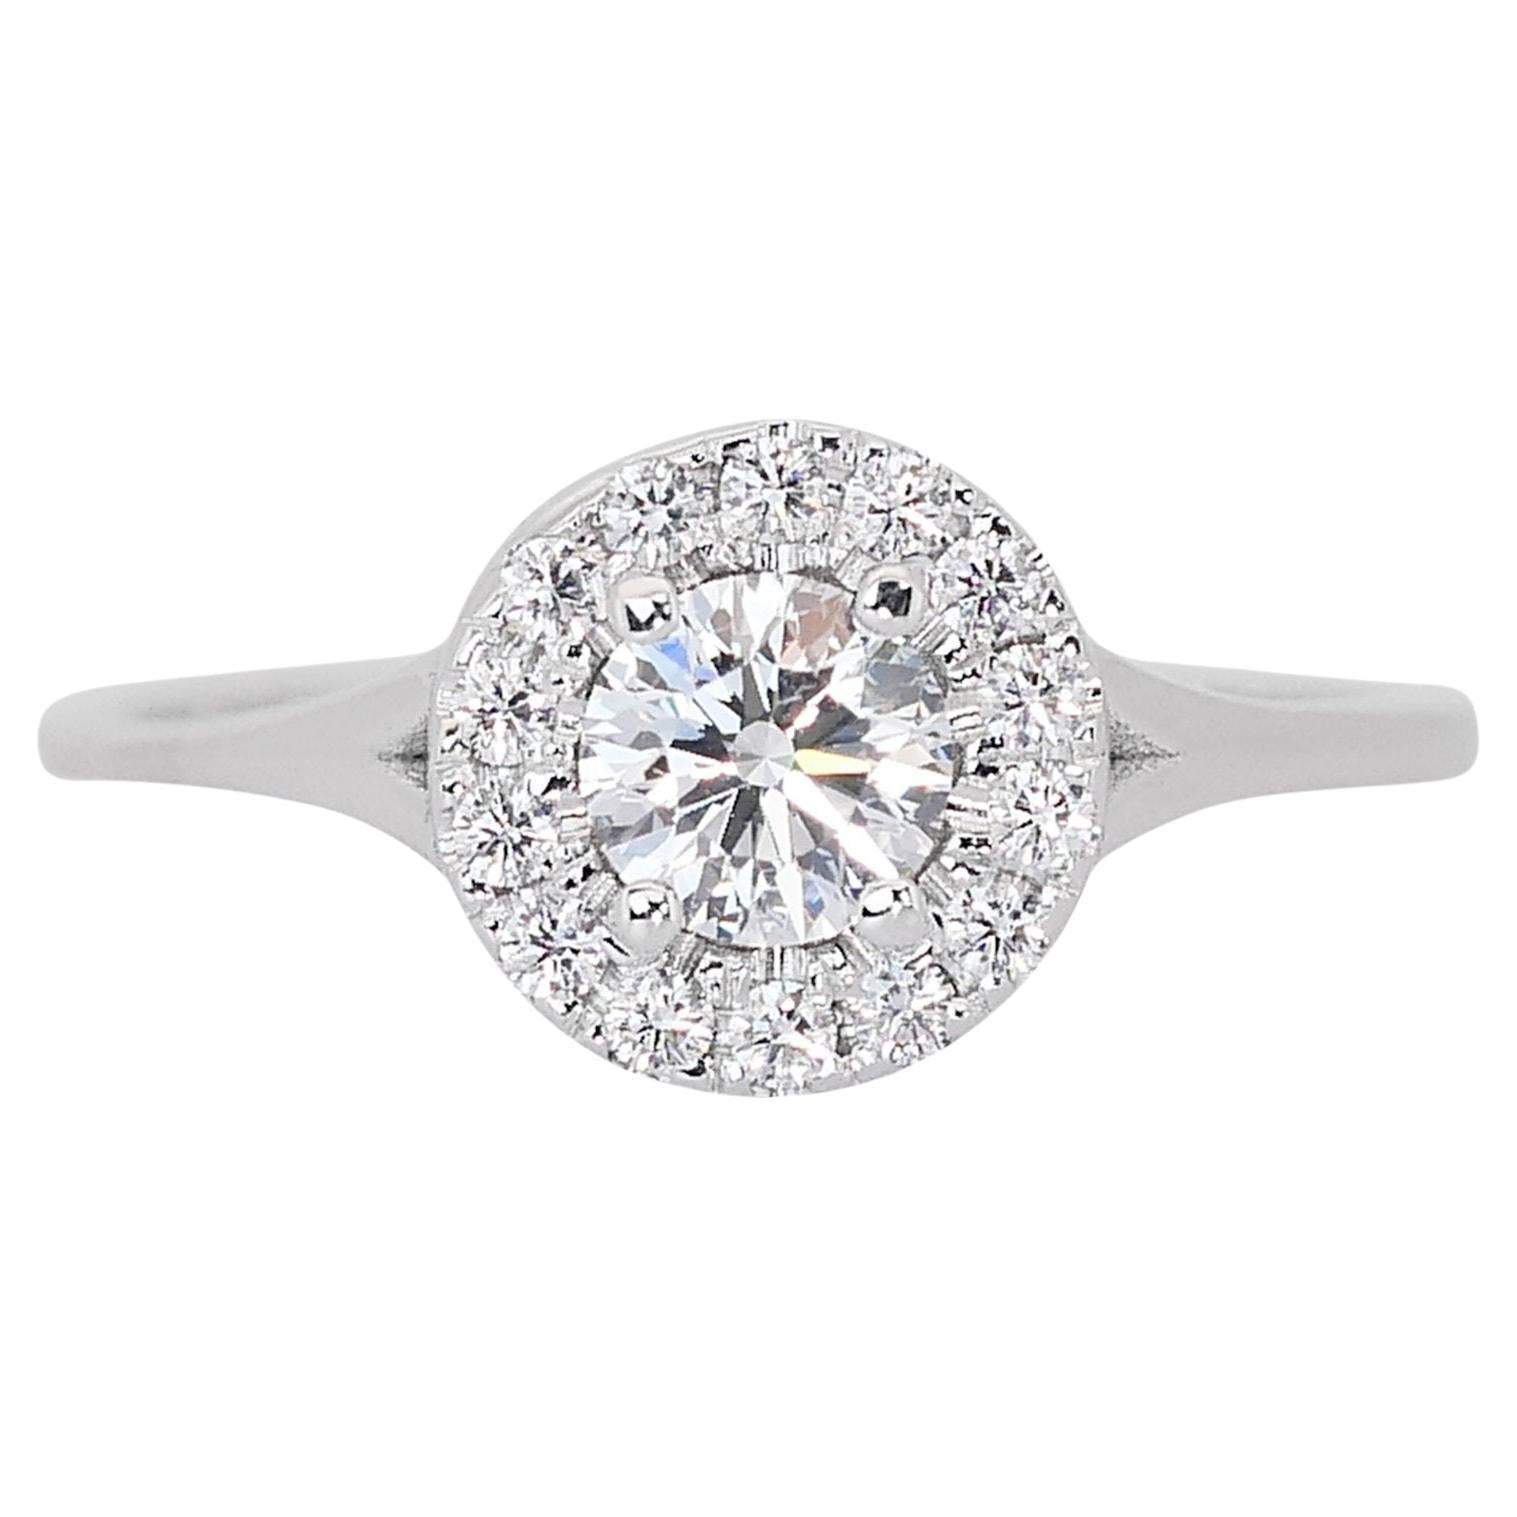 Majestic 18K White Gold Halo Natural Diamond Ring with 0.43ct - GIA Certified